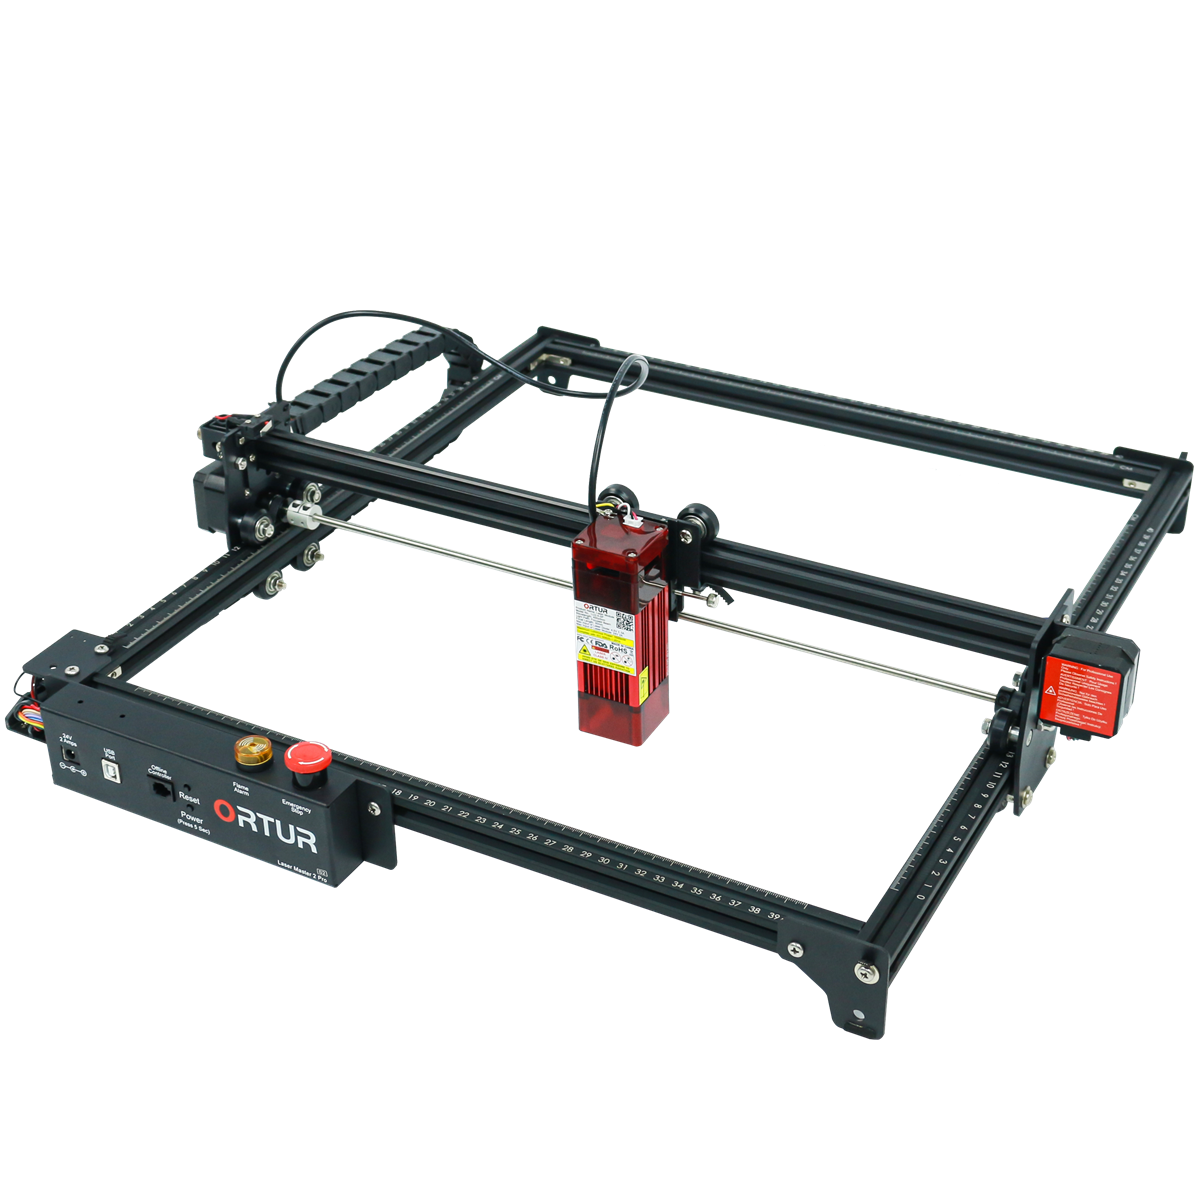 Find ORTUR Laser Master 2 Pro S2 LU2 4 LF SF Laser Engraving Cutting Machine 400 x 430mm Large Engraving Area Fast Speed 10 000mm/Min High Precision Laser Engraver for Sale on Gipsybee.com with cryptocurrencies